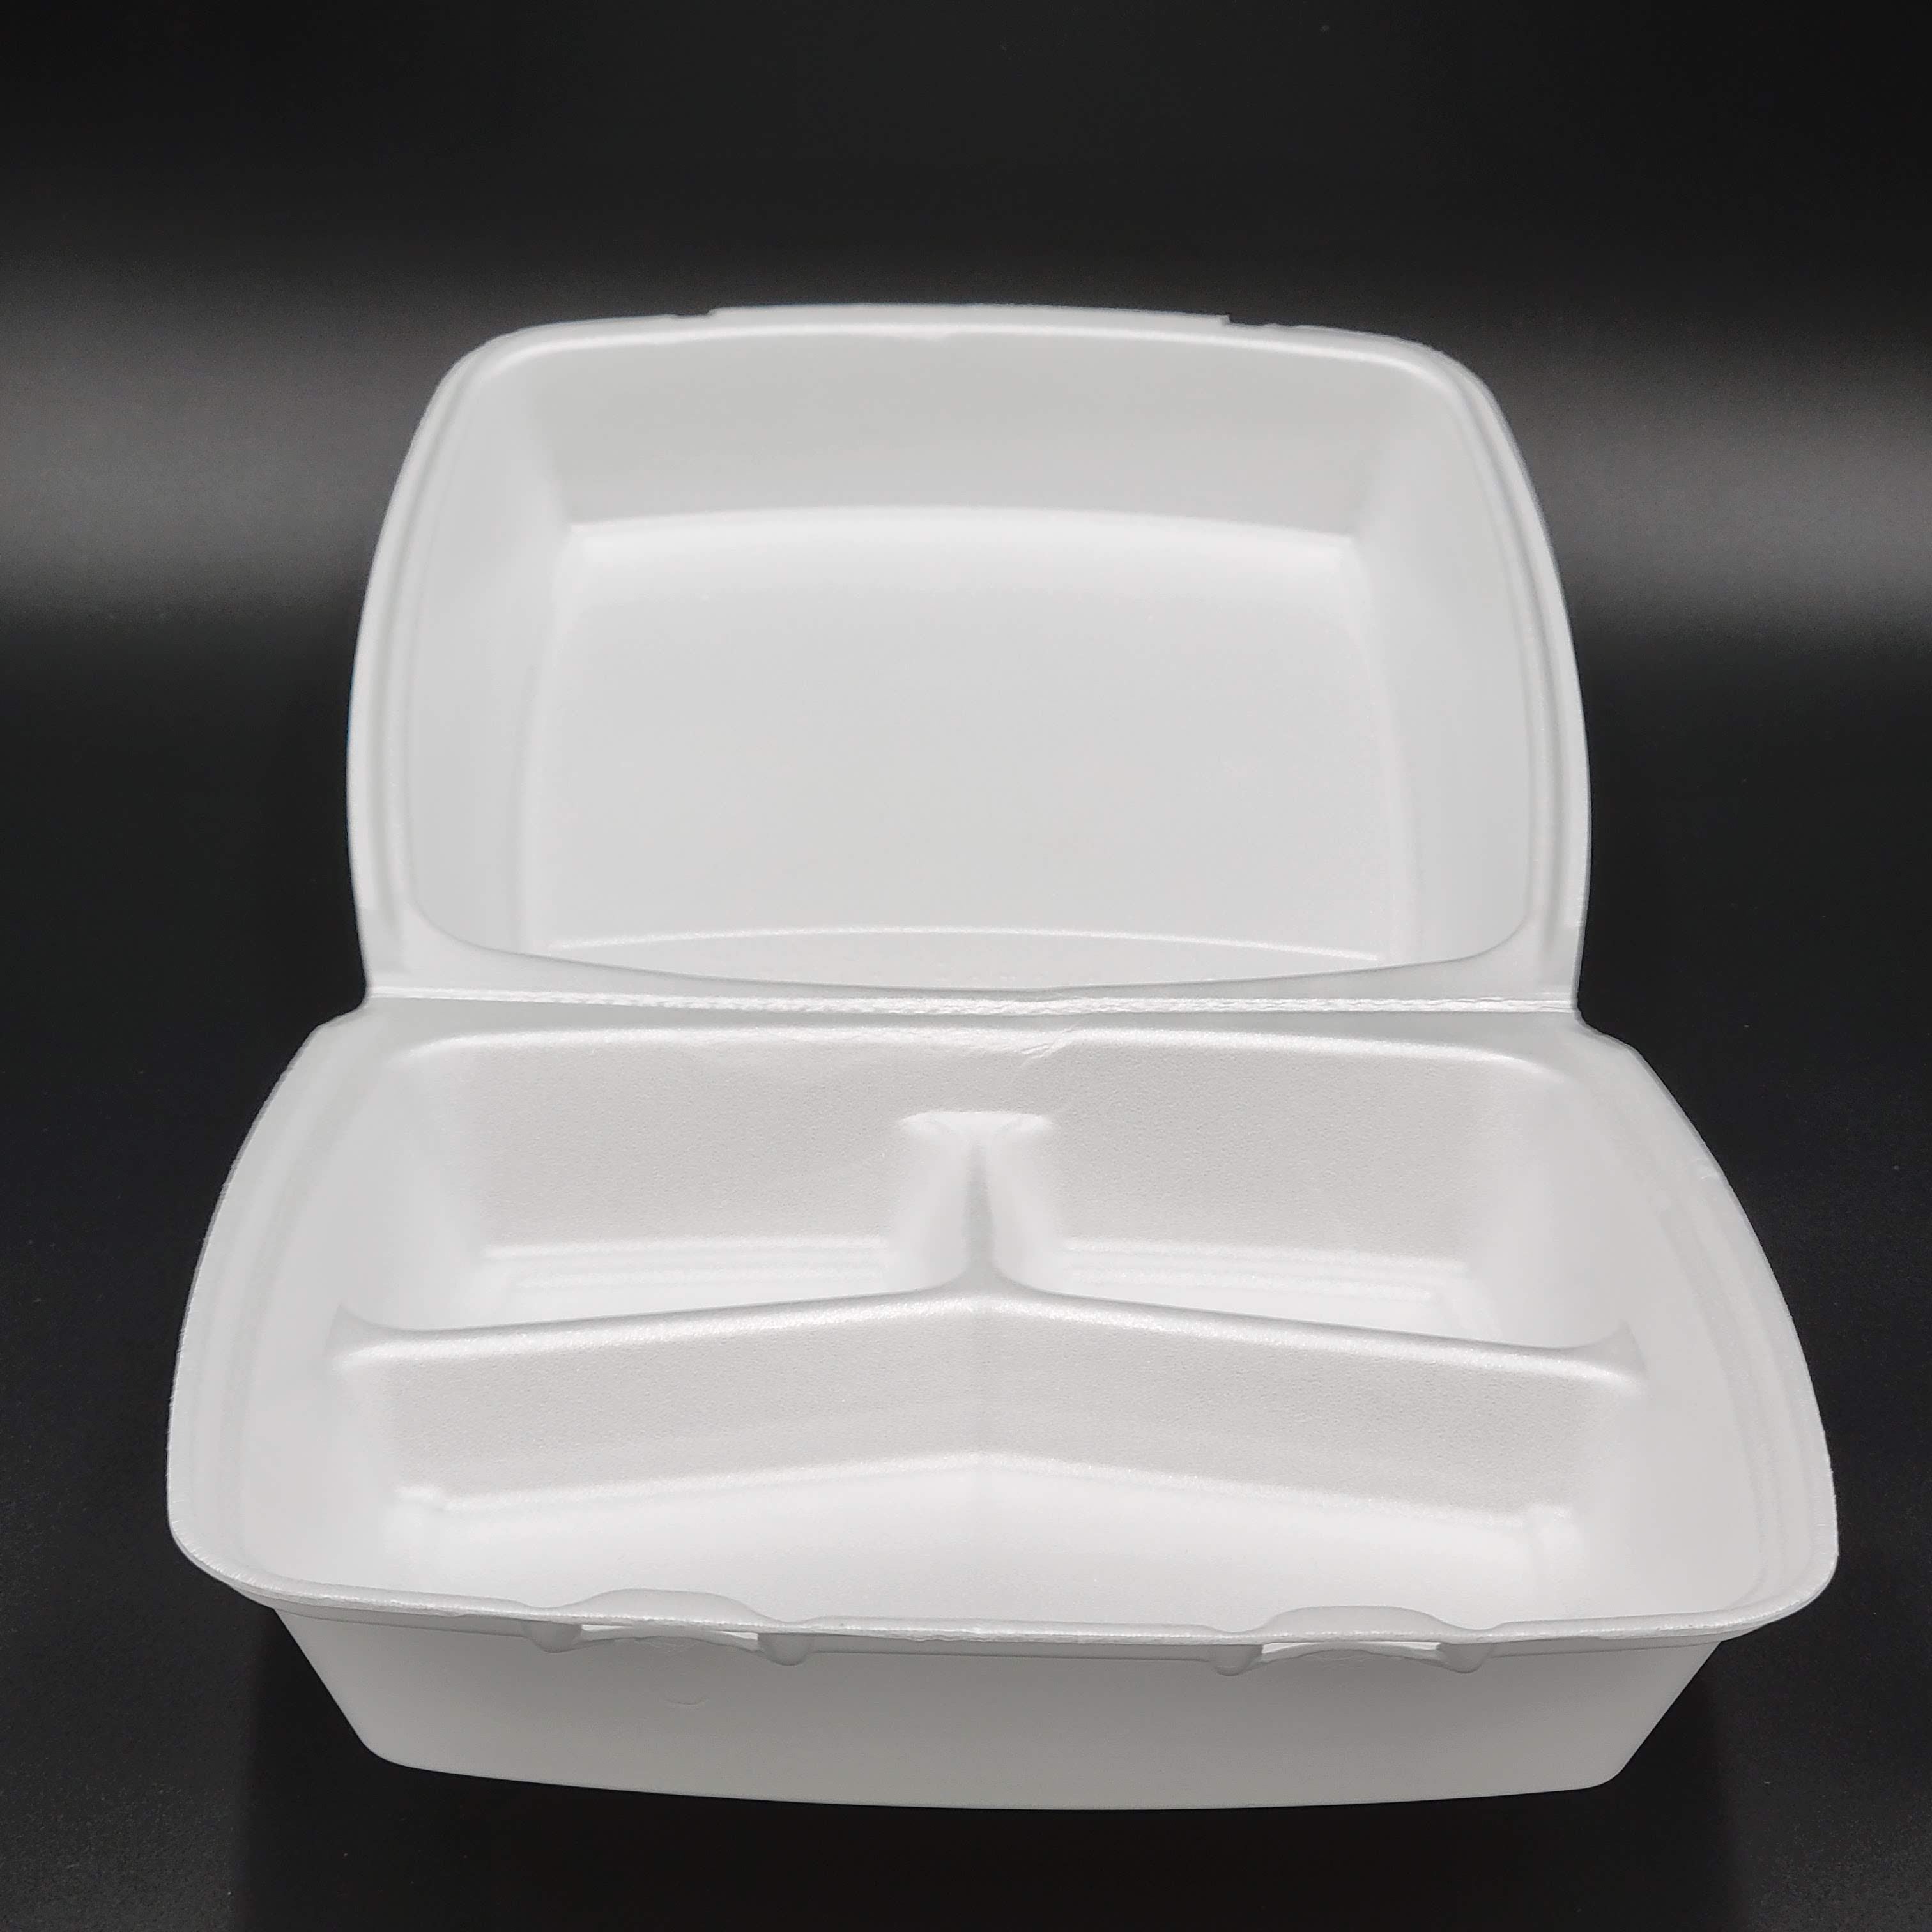 Dart Carryout Food Container Foam 1-Comp 5 1/2 x 5 3/8 x 2 7/8 White 500/Carton